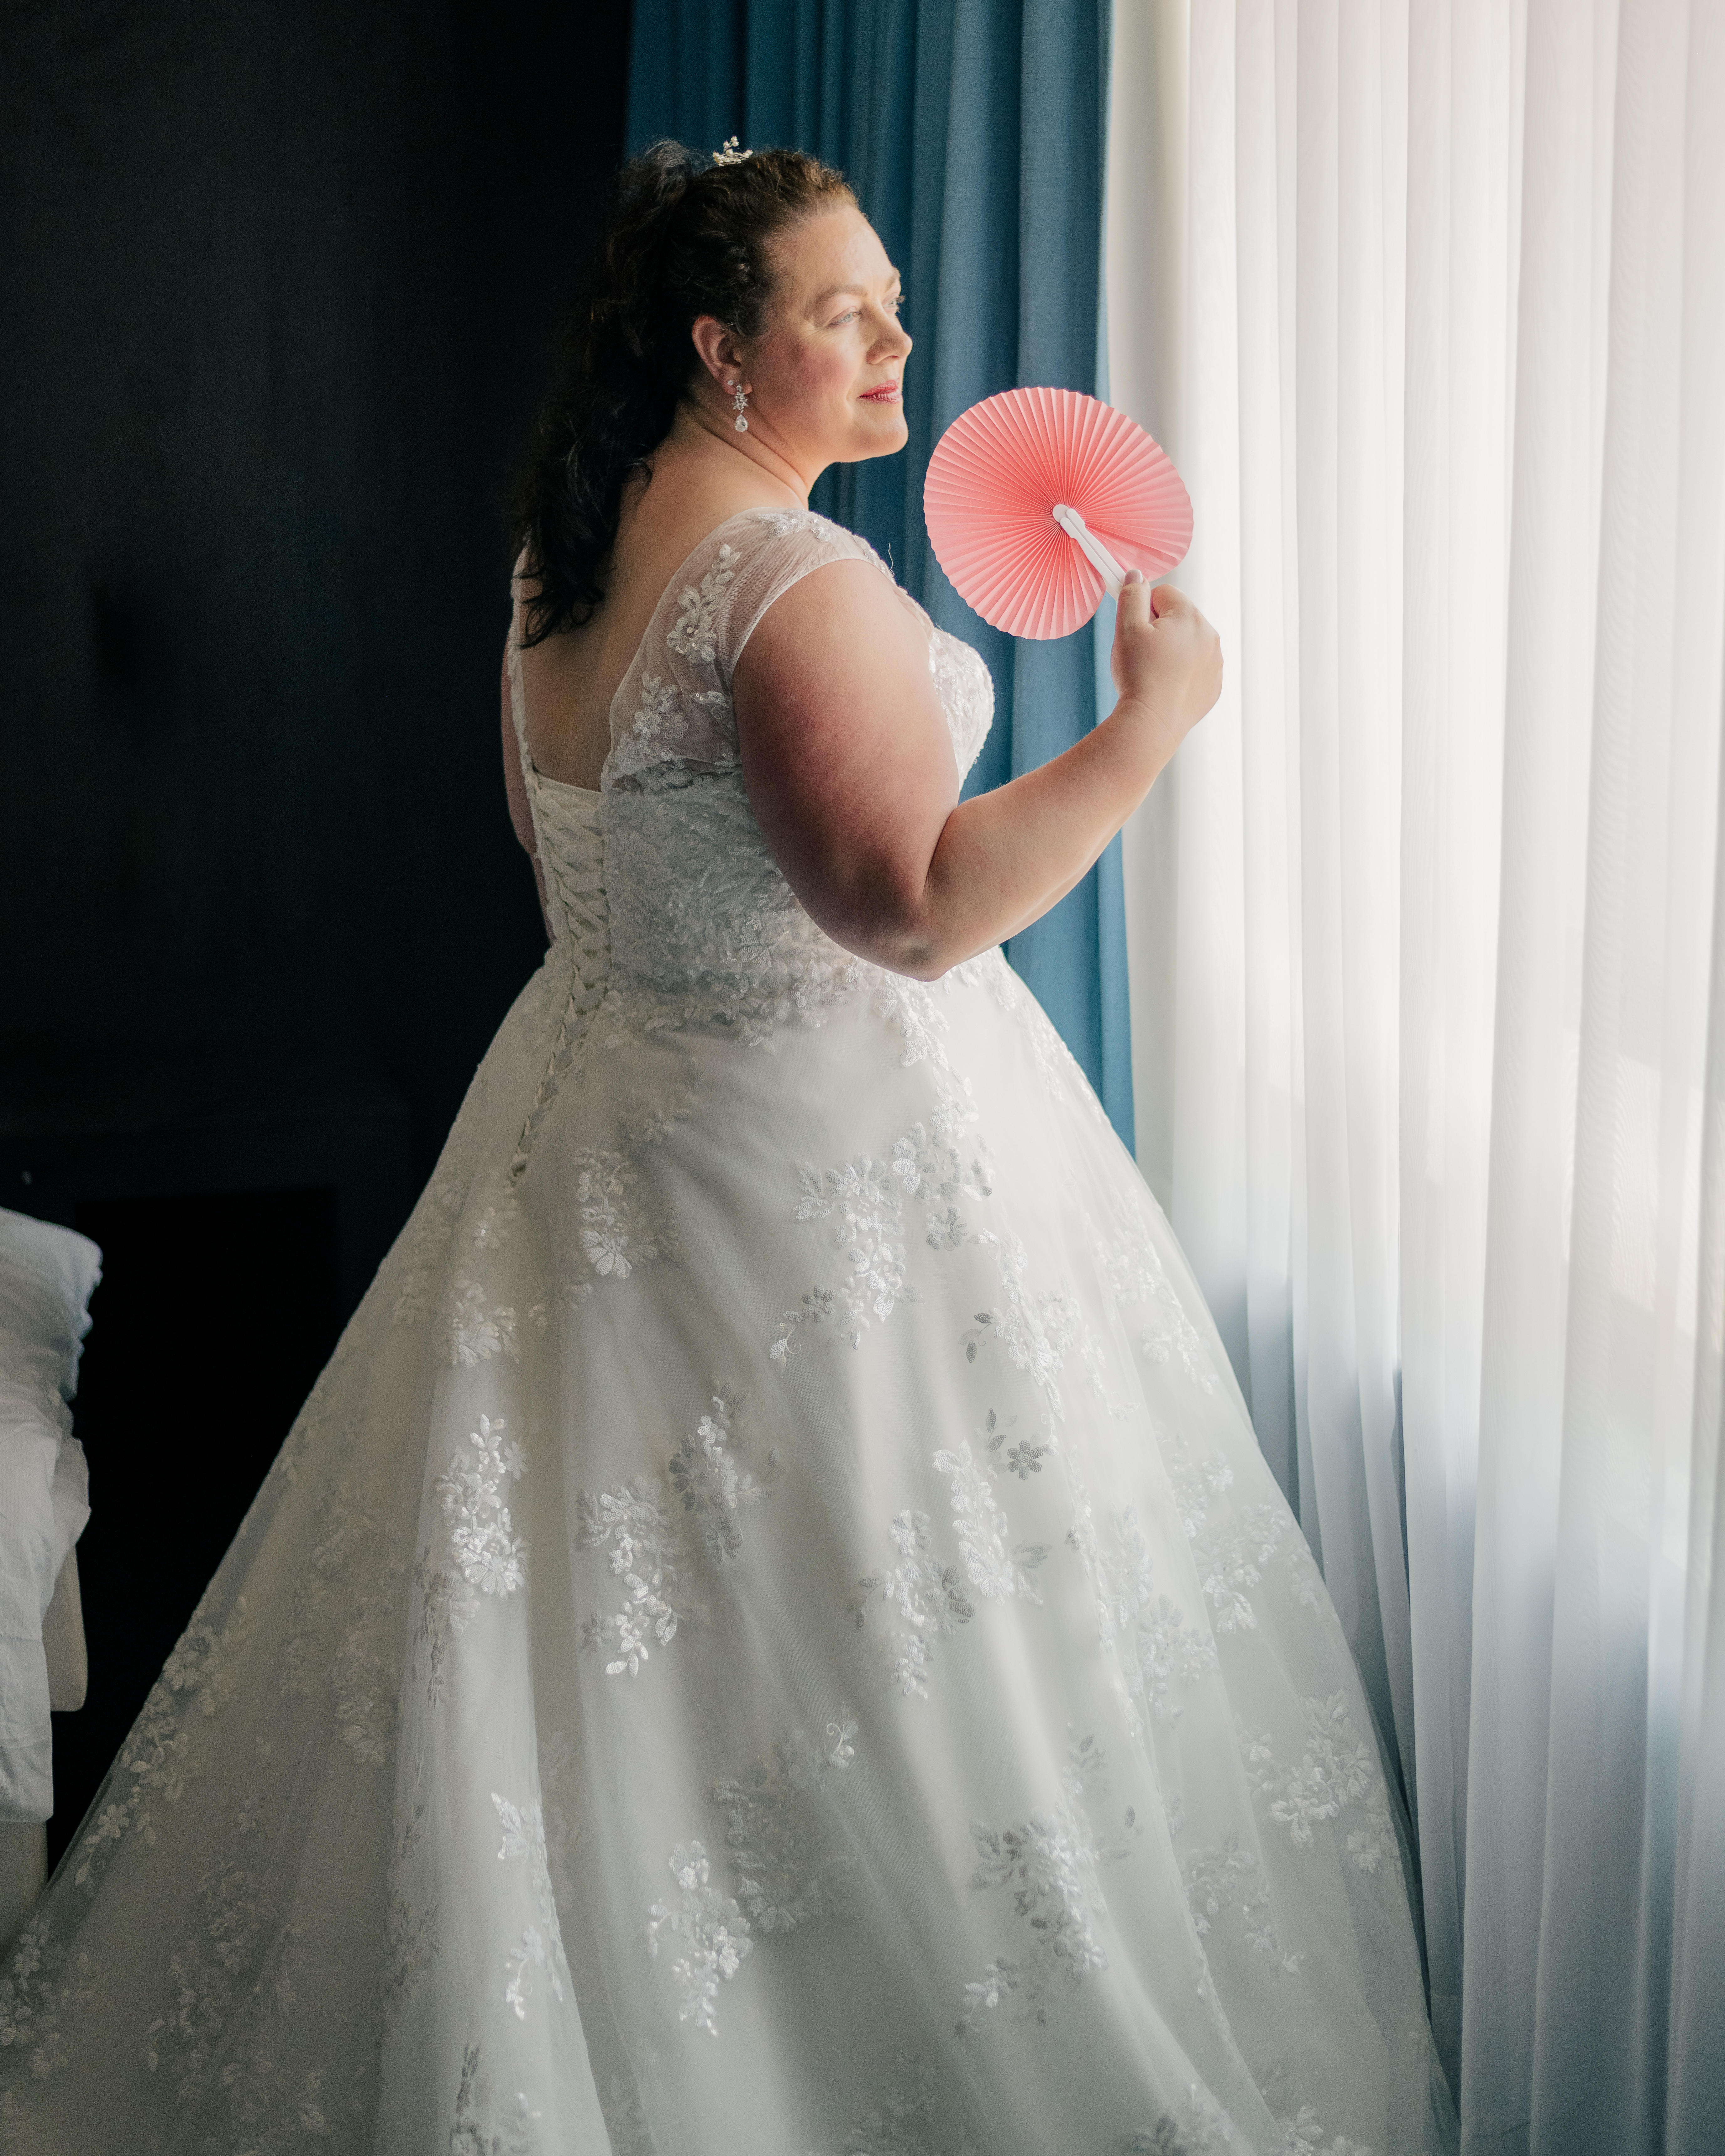 bridal portrait of a bride looking out a lightly curtained window holding a coral coloured hand fan